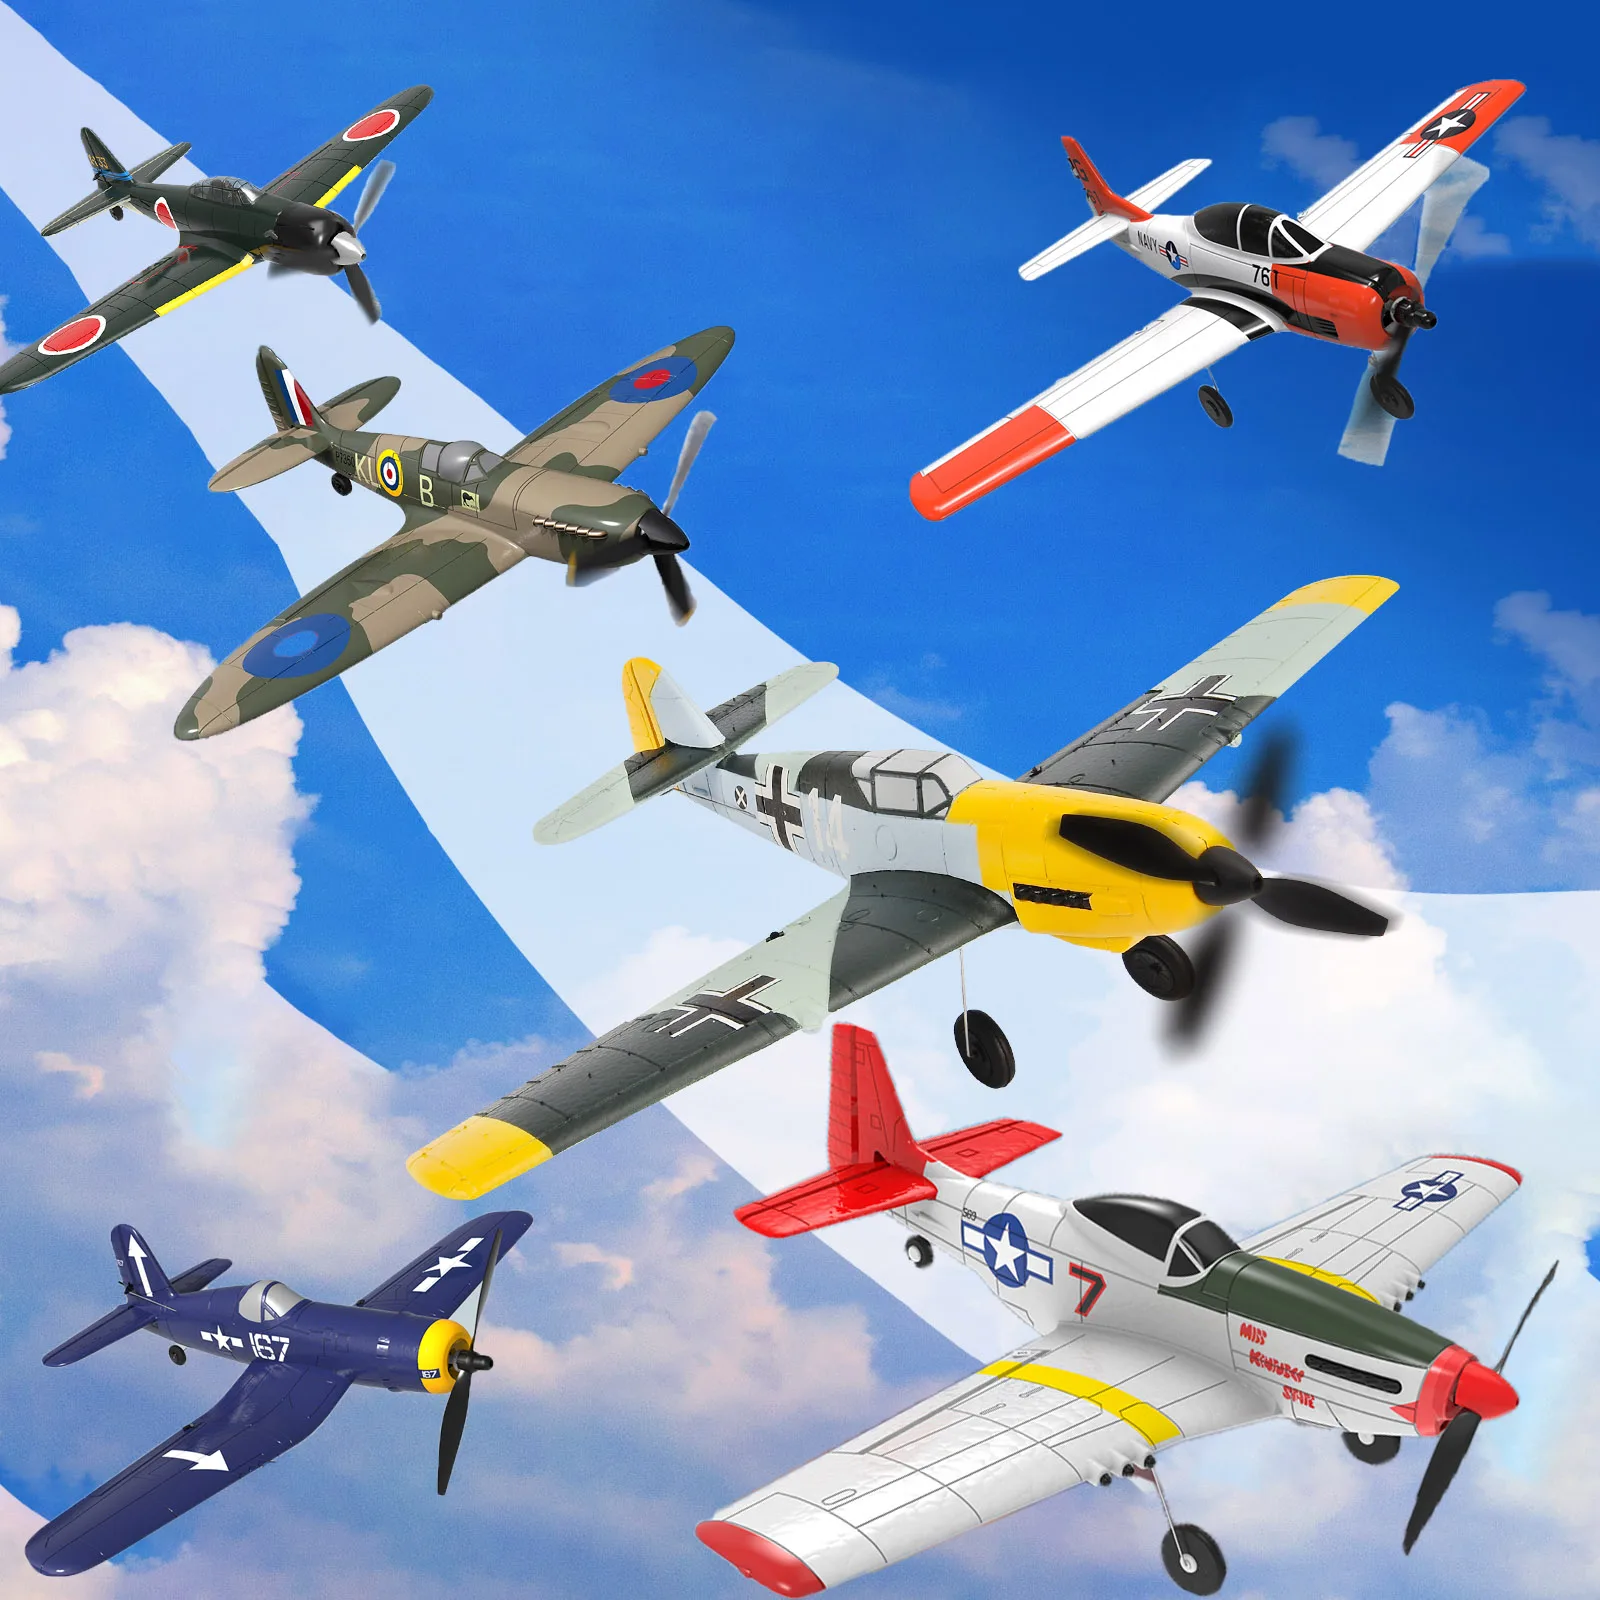 

Airplane Wing Fighter P51D Mustang Xpilot Stabilization System EPP 400mm F4U Corsair 4-Ch 2.4G 6-Axis PNP Airplan Gift Toys